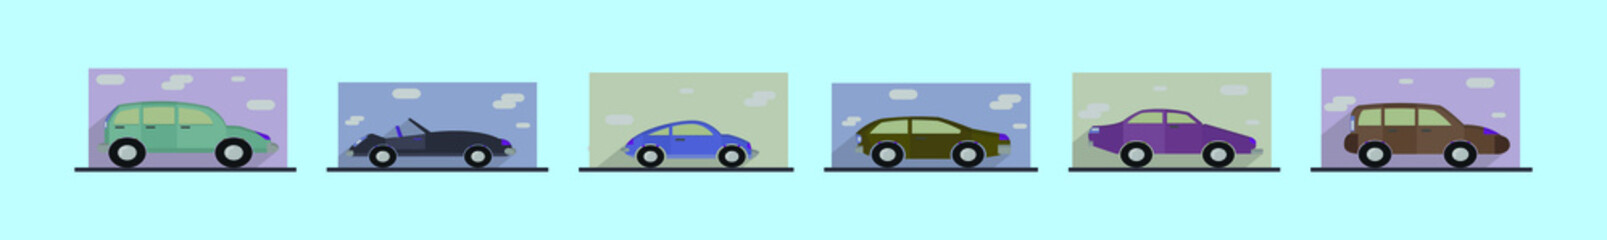 set of car cartoon icon design template with various models. vector illustration isolated on blue background